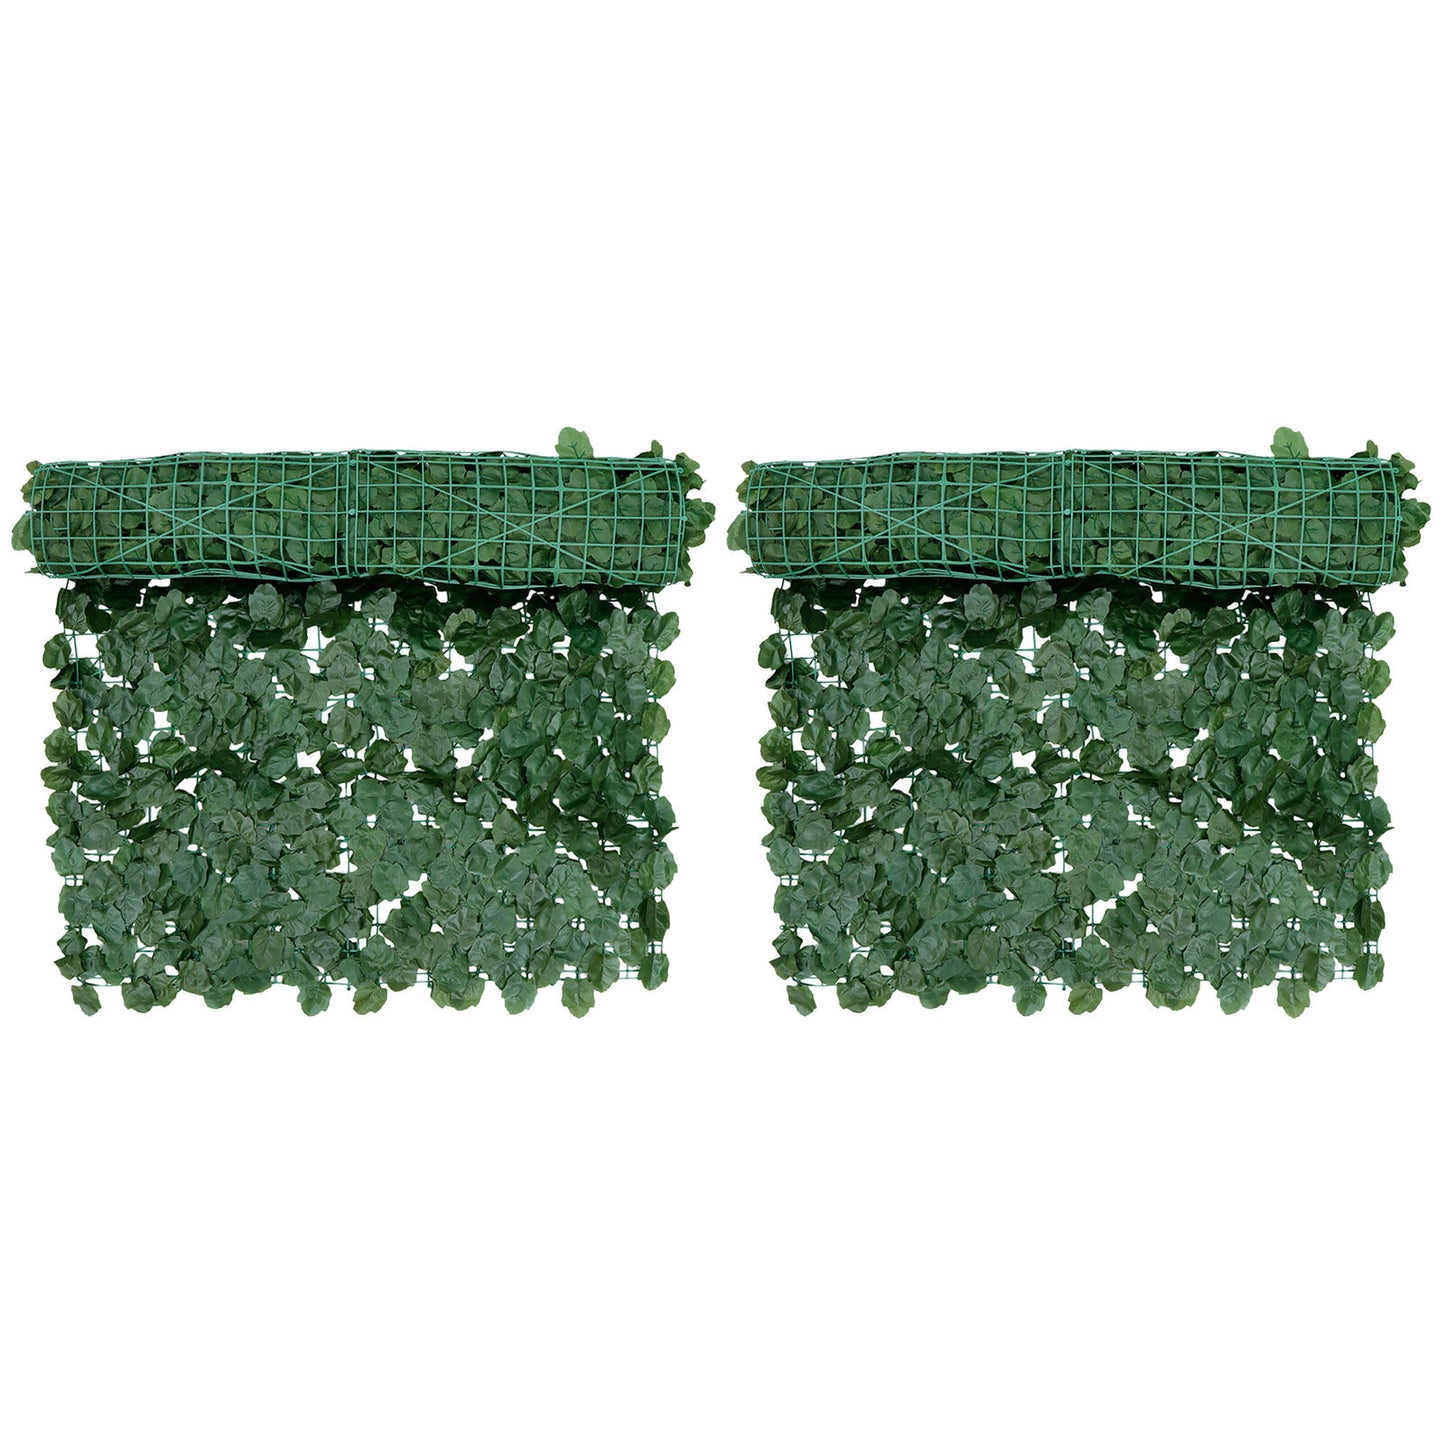 2X 98" X 59" Decorative Double Side Artificial Ivy Privacy Fencing Screen